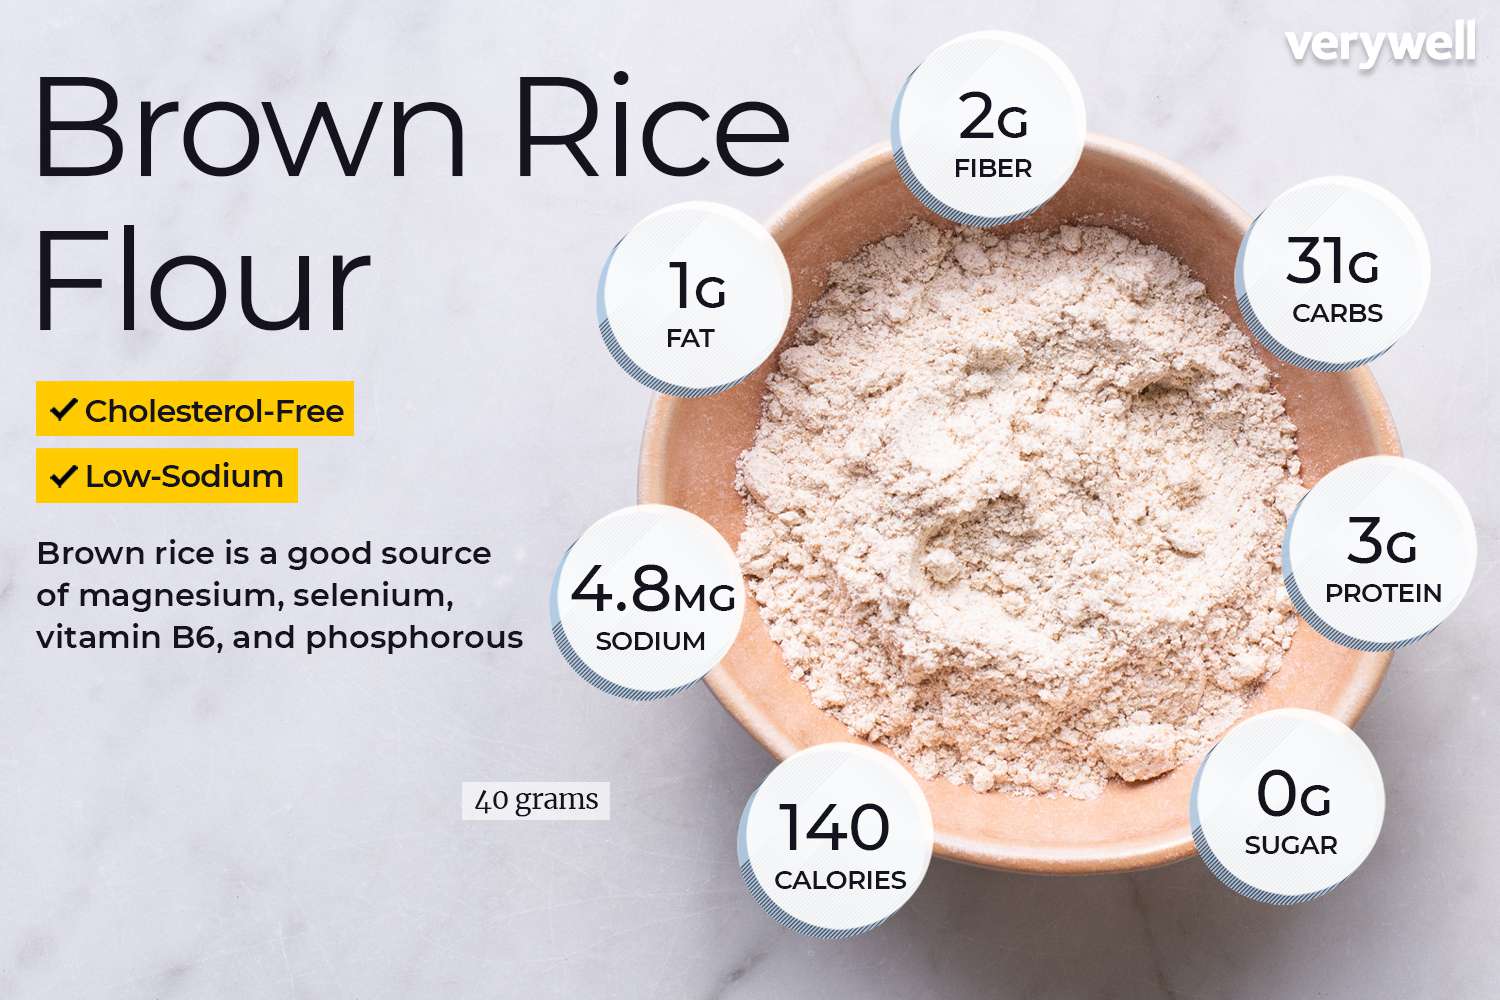 Brown rice flour nutrition facts